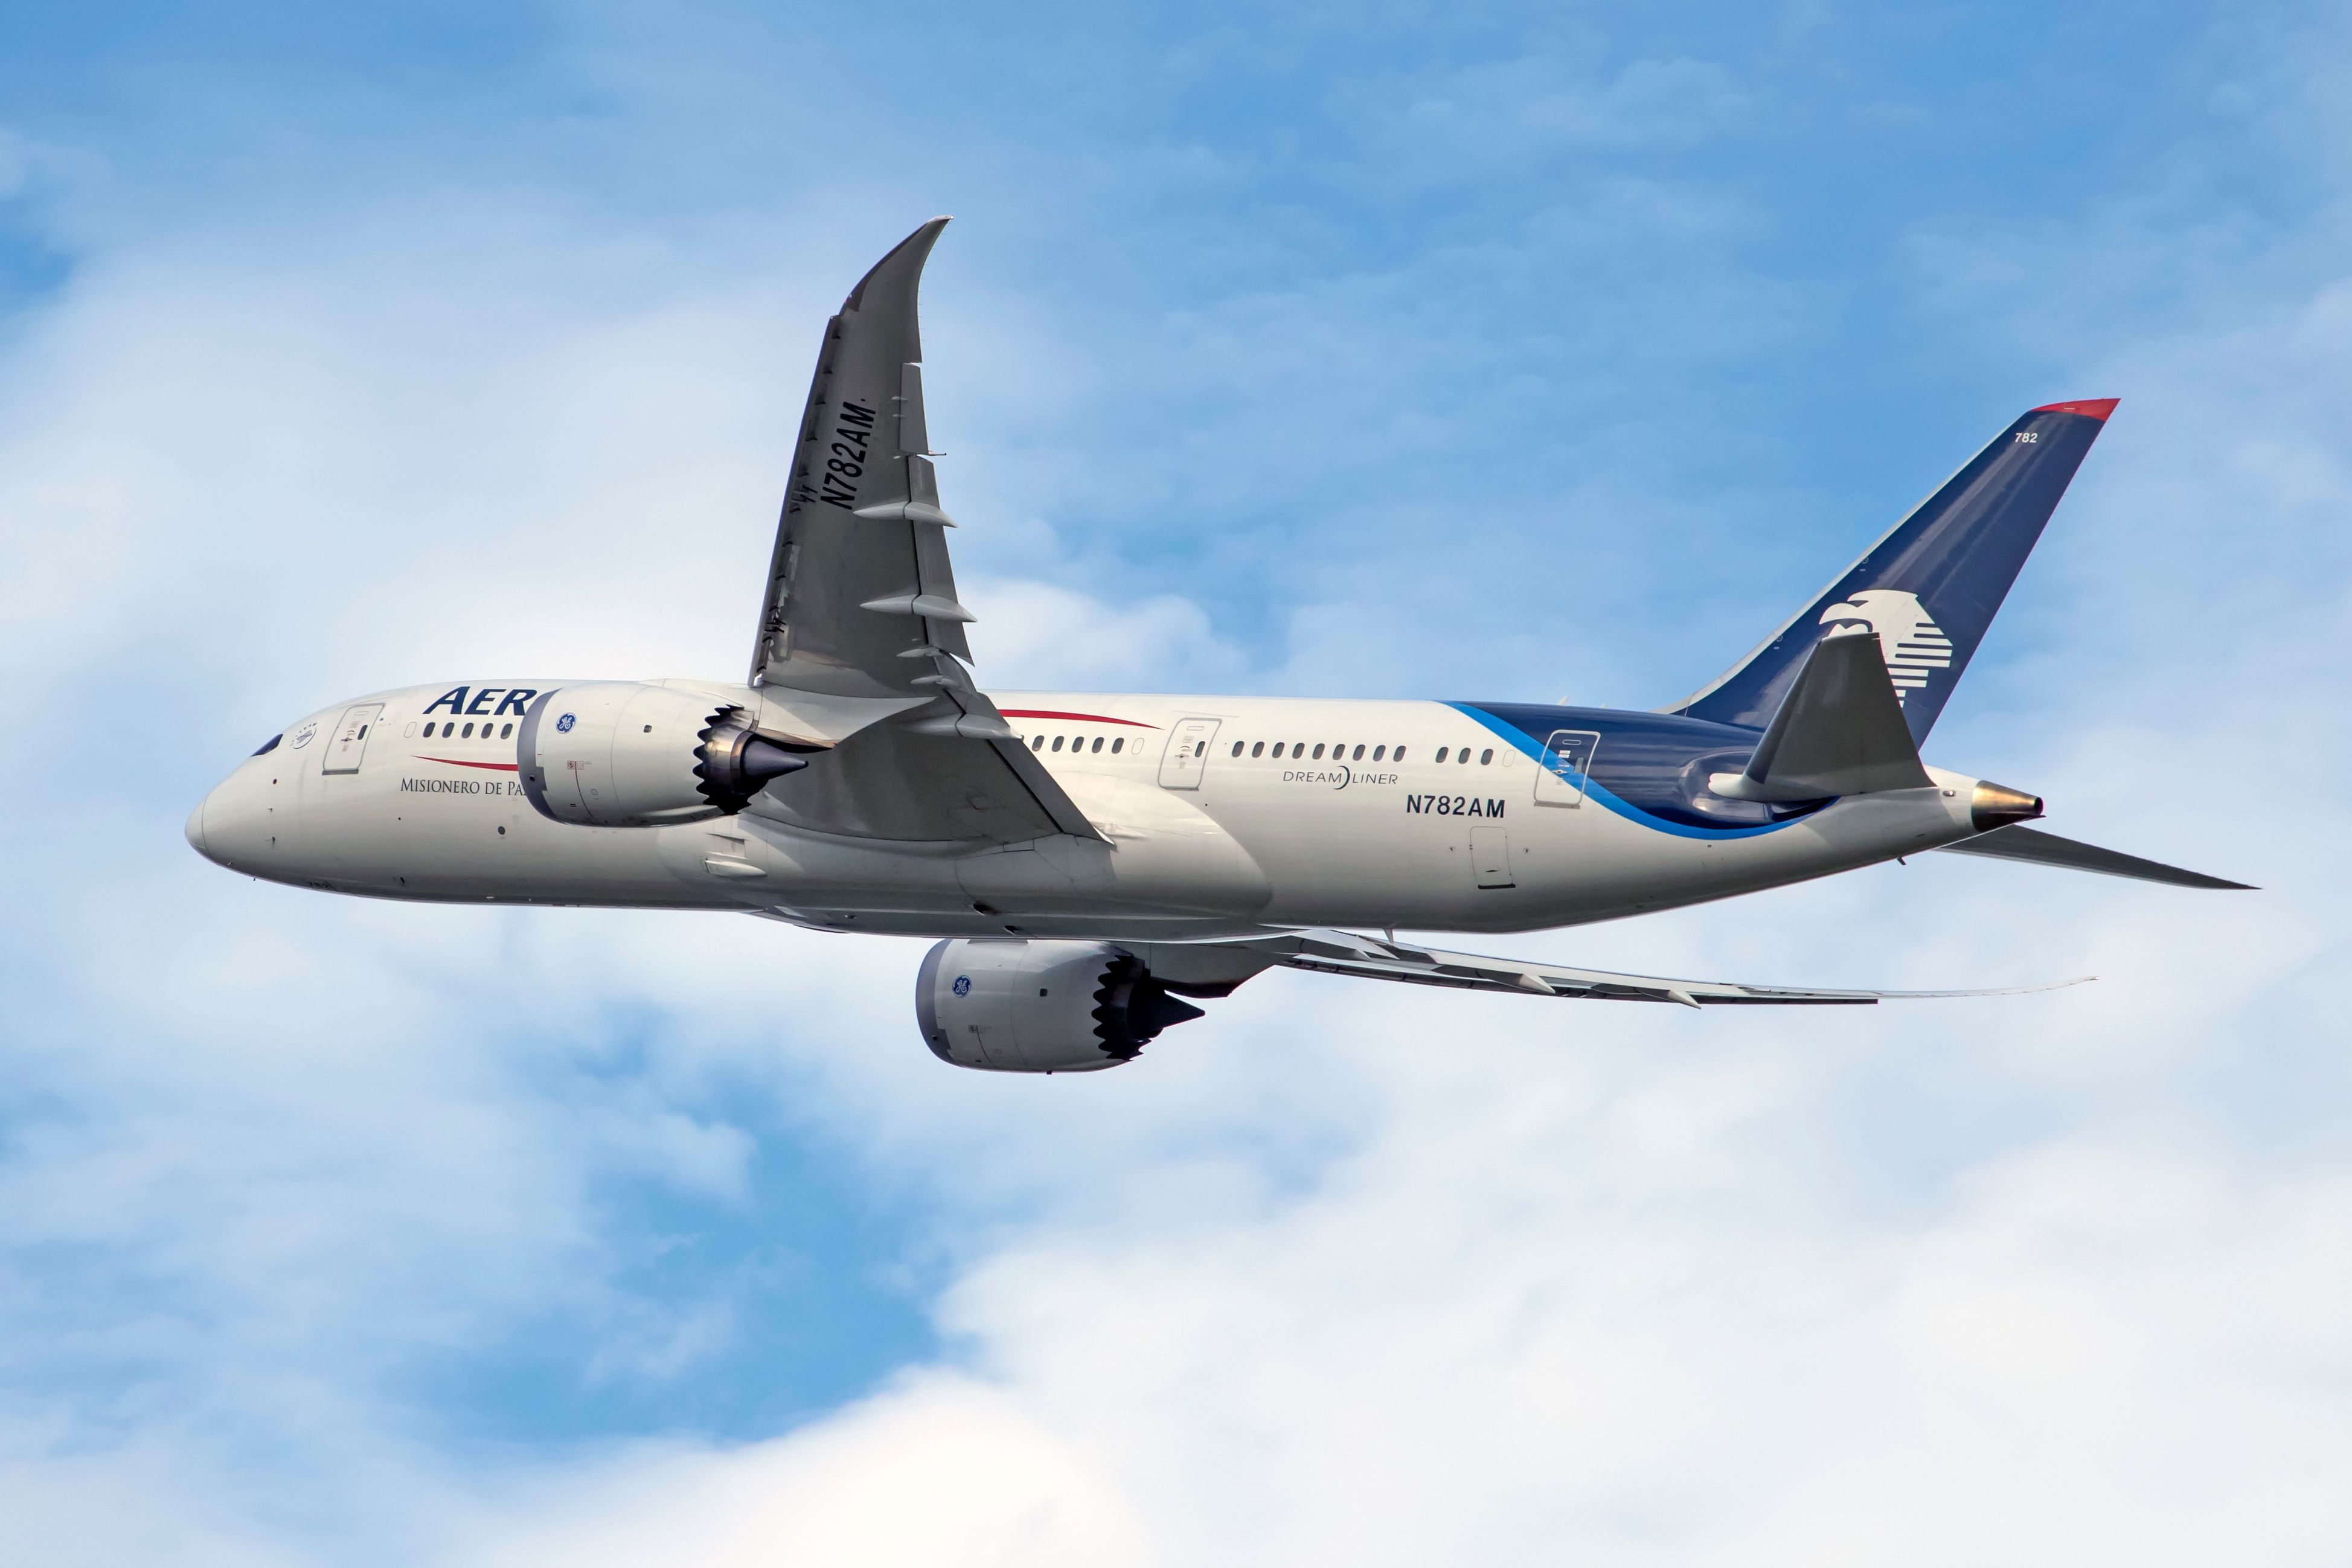 An Aeromexico 787-8 Dreamliner flying in the sky.